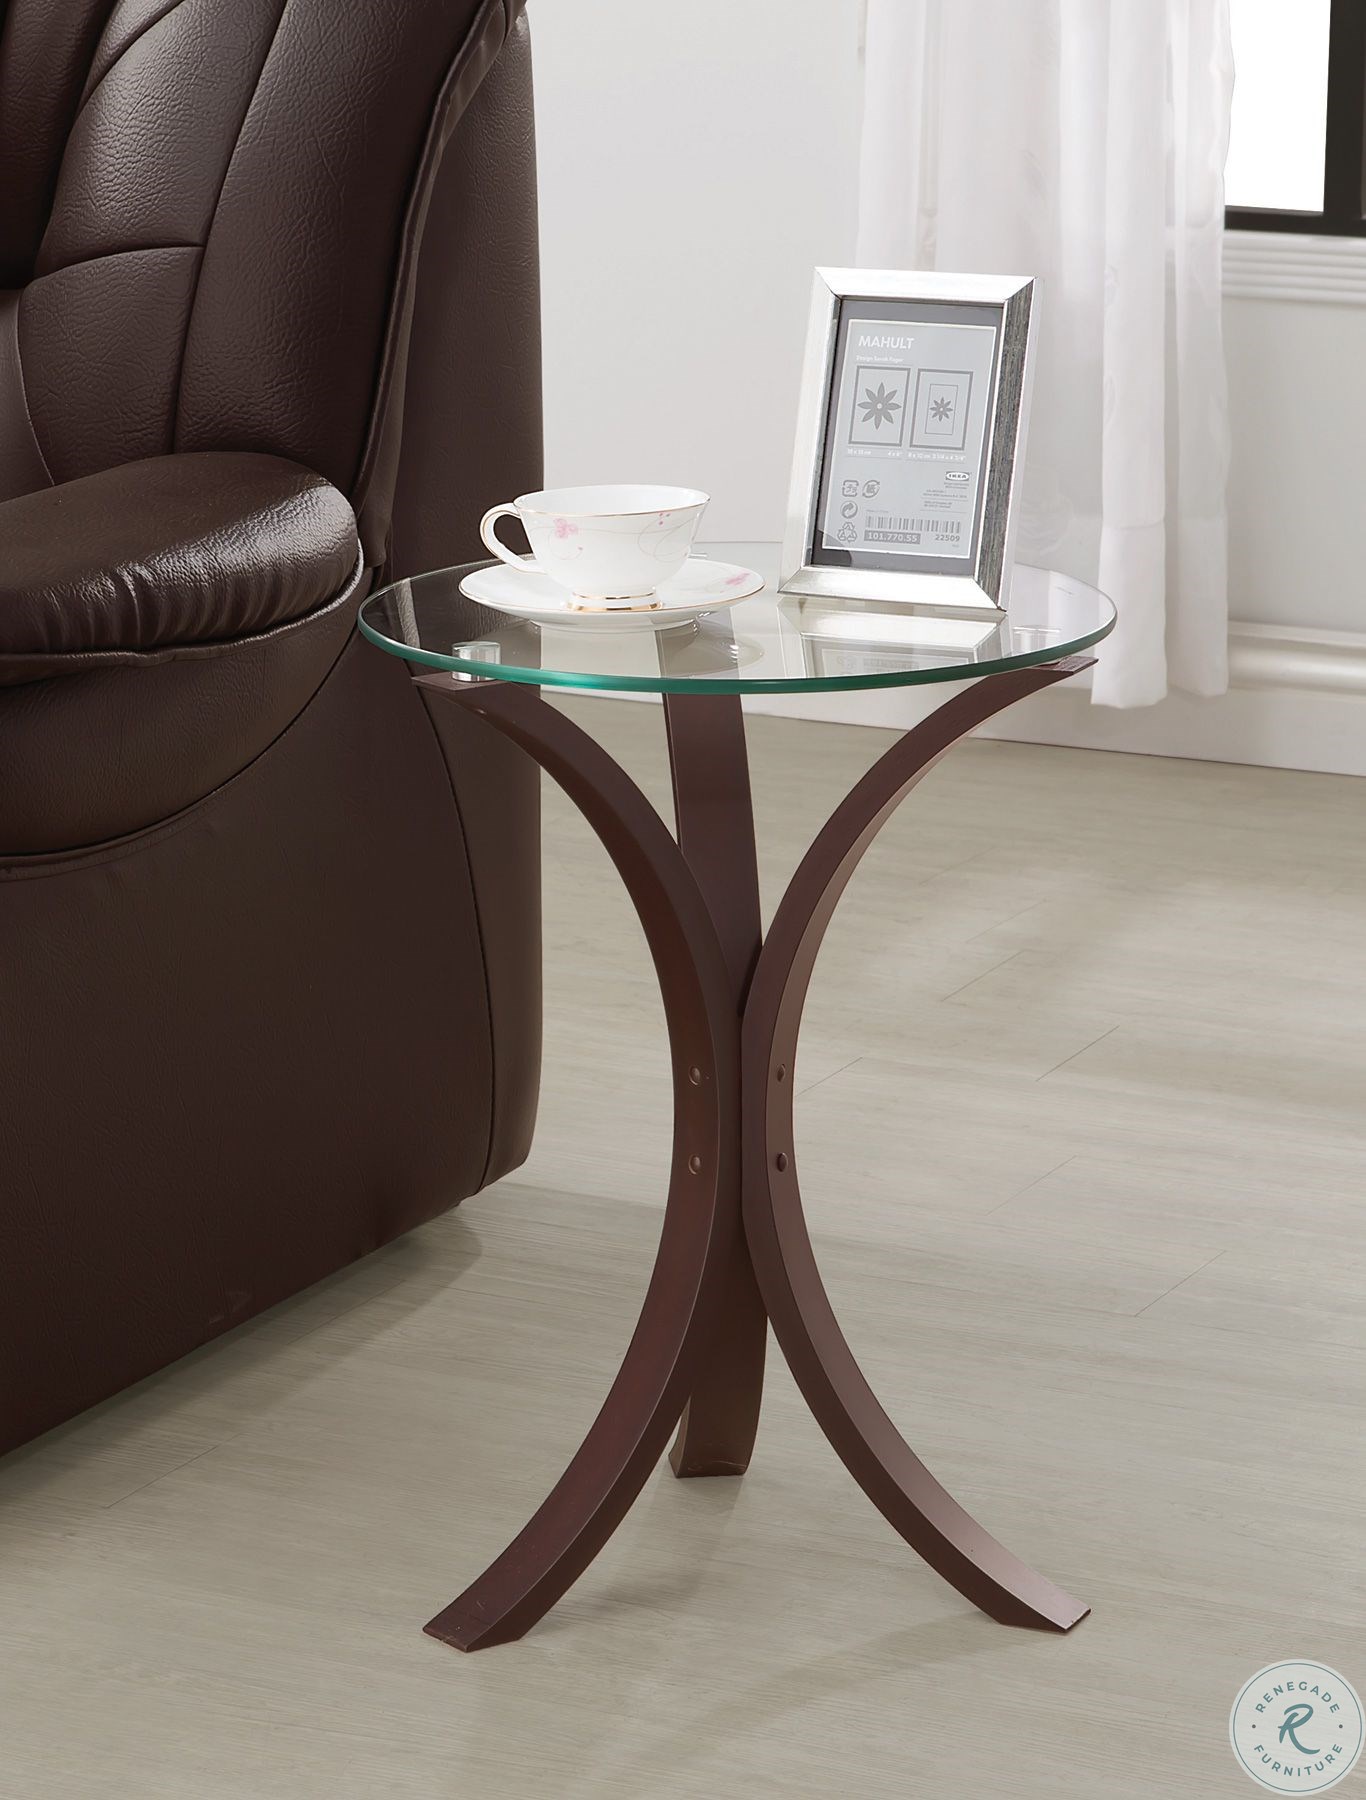 902867 Cappuccino Accent Table